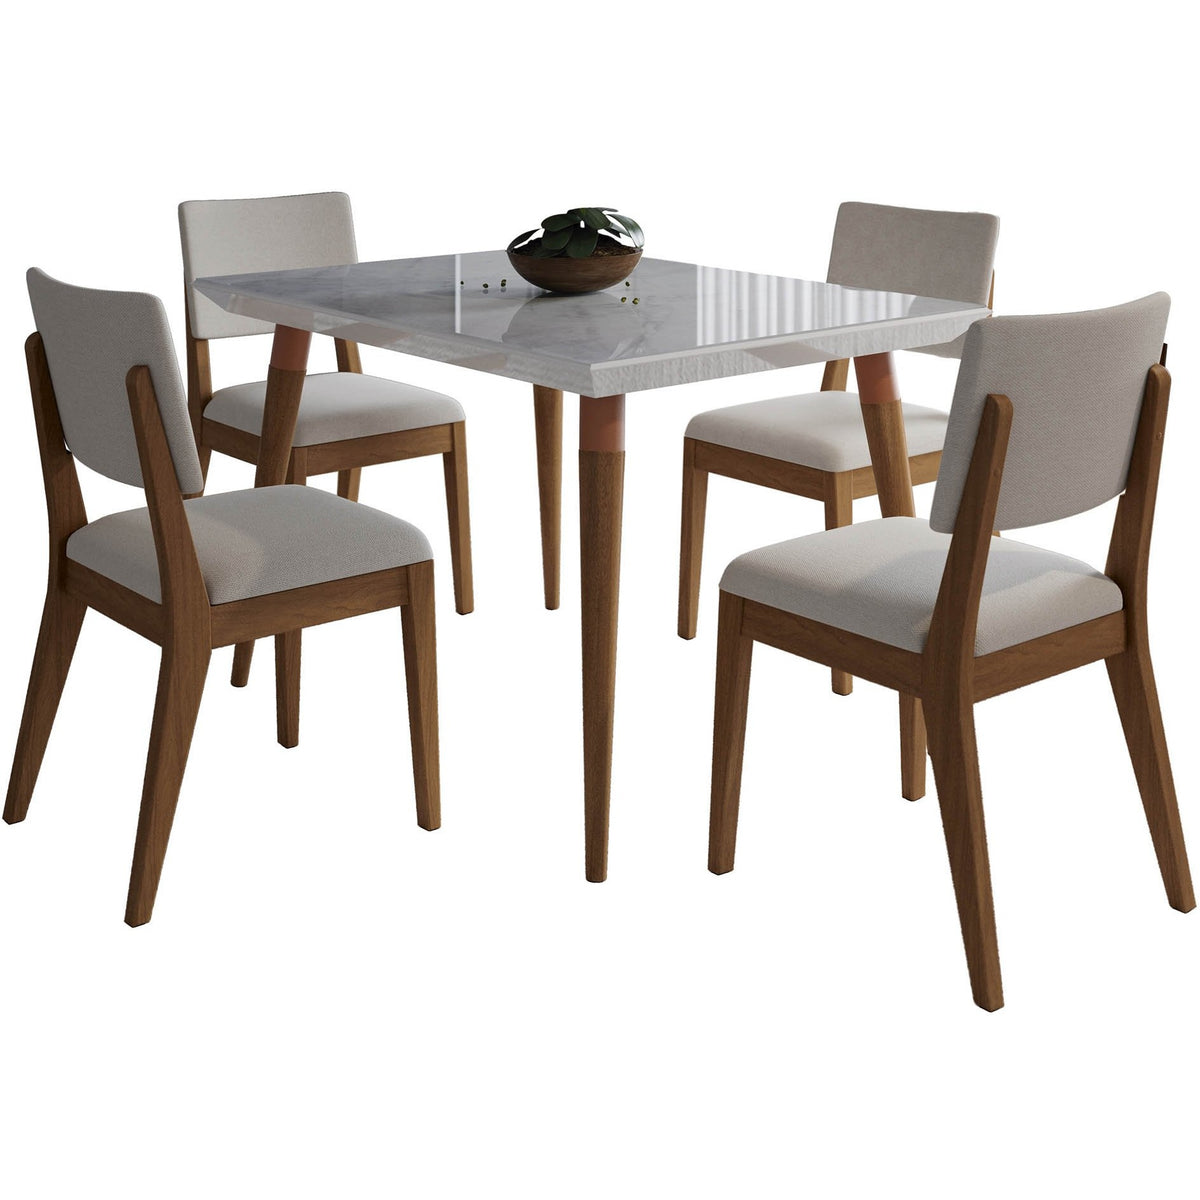 Manhattan Comfort 5-Piece Utopia 47.24" and Dover Dining Set with 4 Dining Chairs in White Gloss Marble and Beige-Minimal & Modern